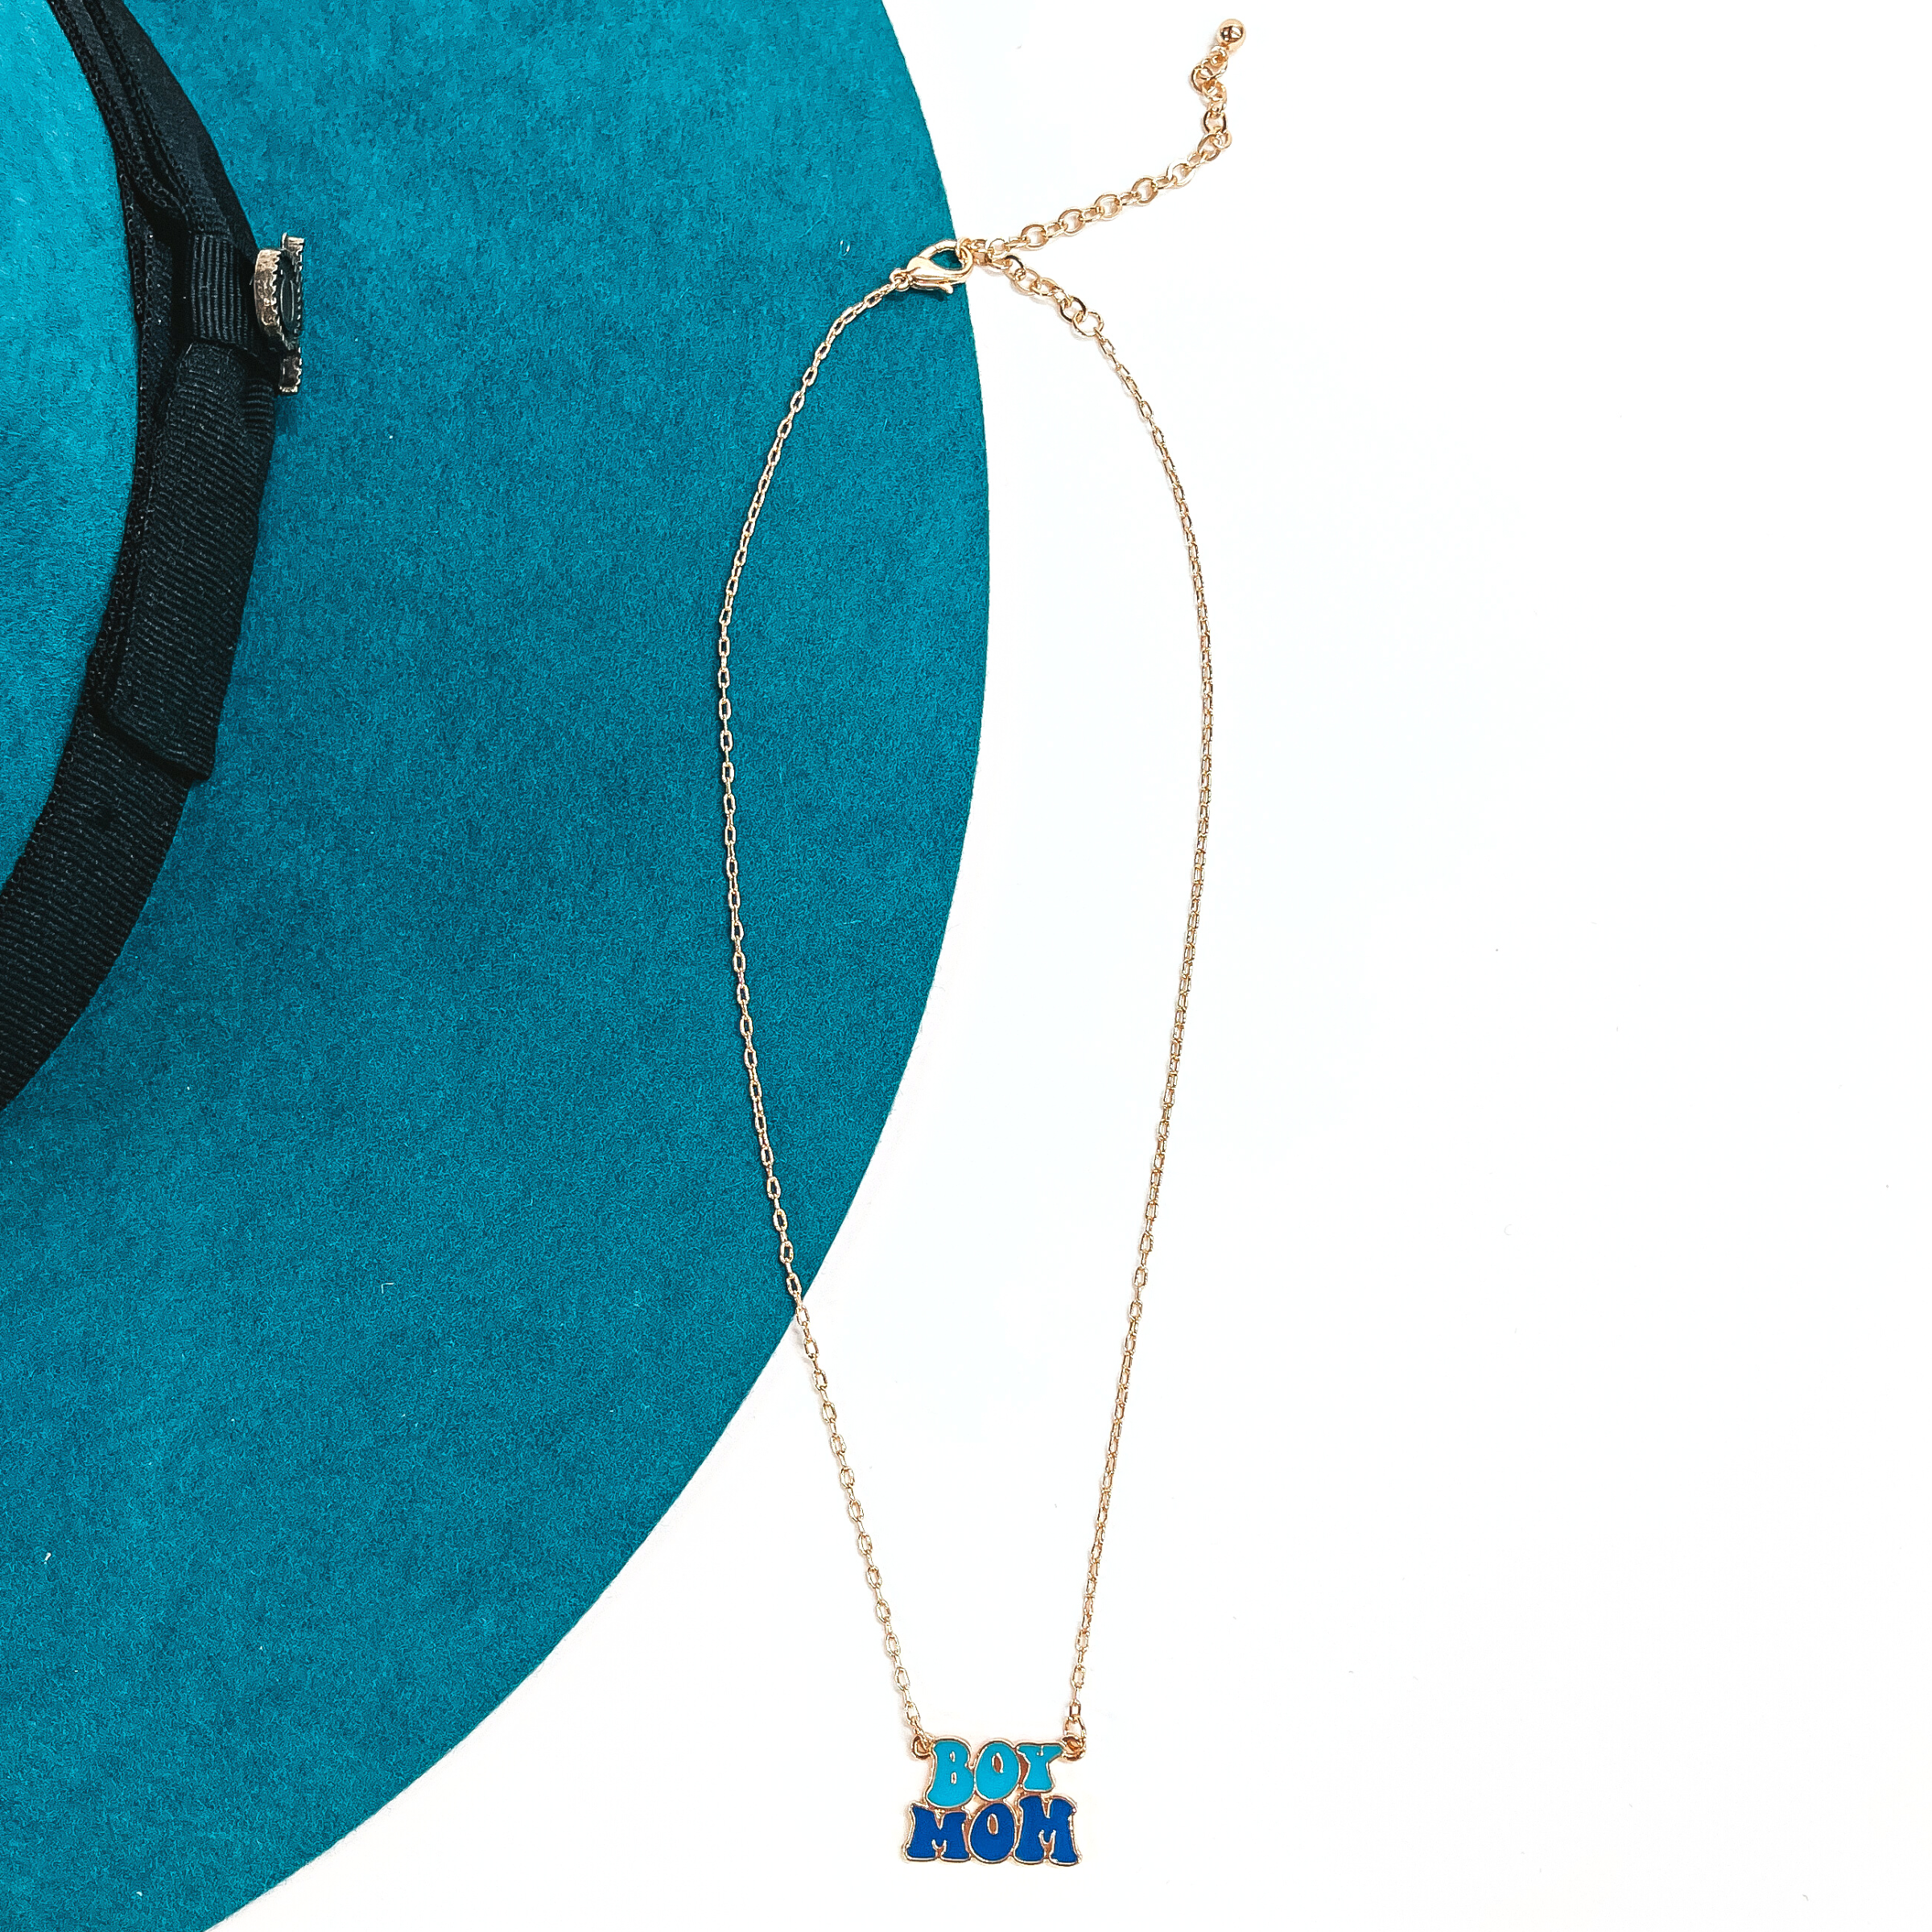 Boy Mom Gold Tone Necklace in Blue - Giddy Up Glamour Boutique